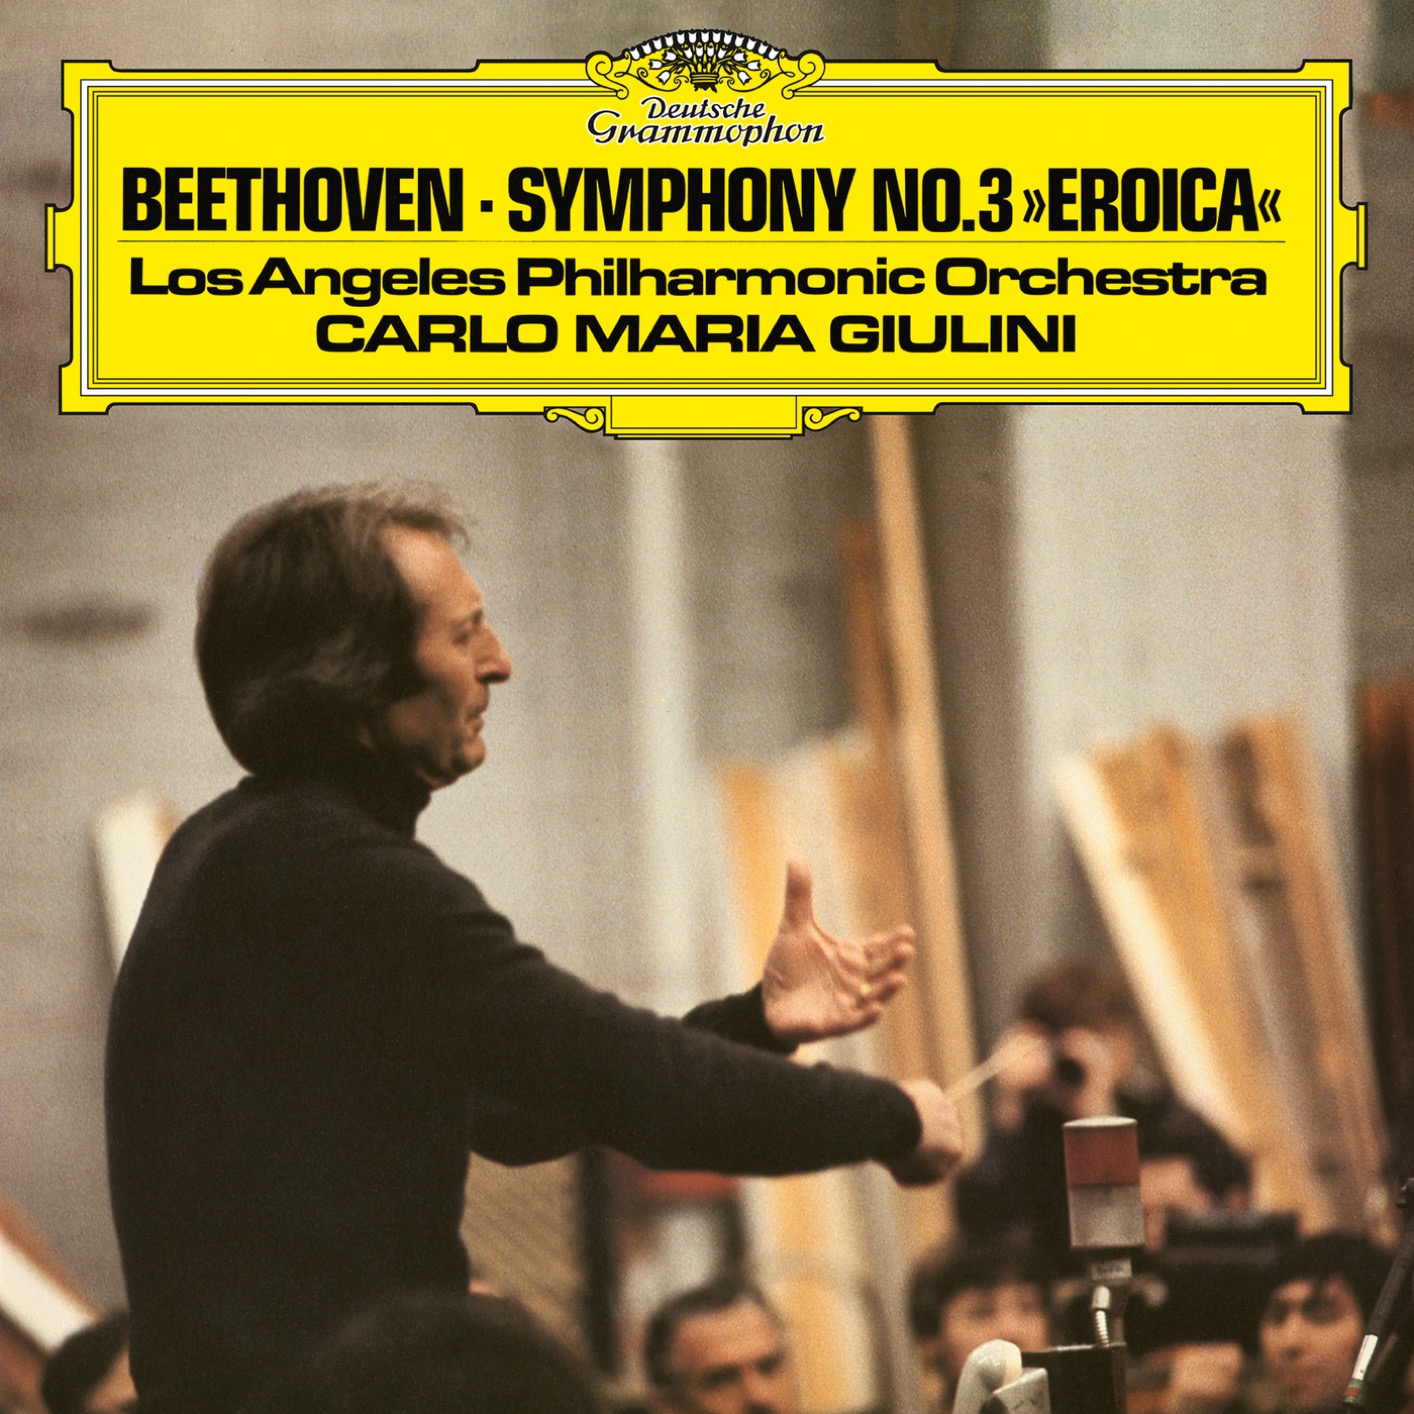 Los Angeles Philharmonic Orchestra & Carlo Maria Giulini – Beethoven: Symphony No. 3 in E Flat, Op. 55 (Remastered) (2019) [FLAC 24bit/96kHz]